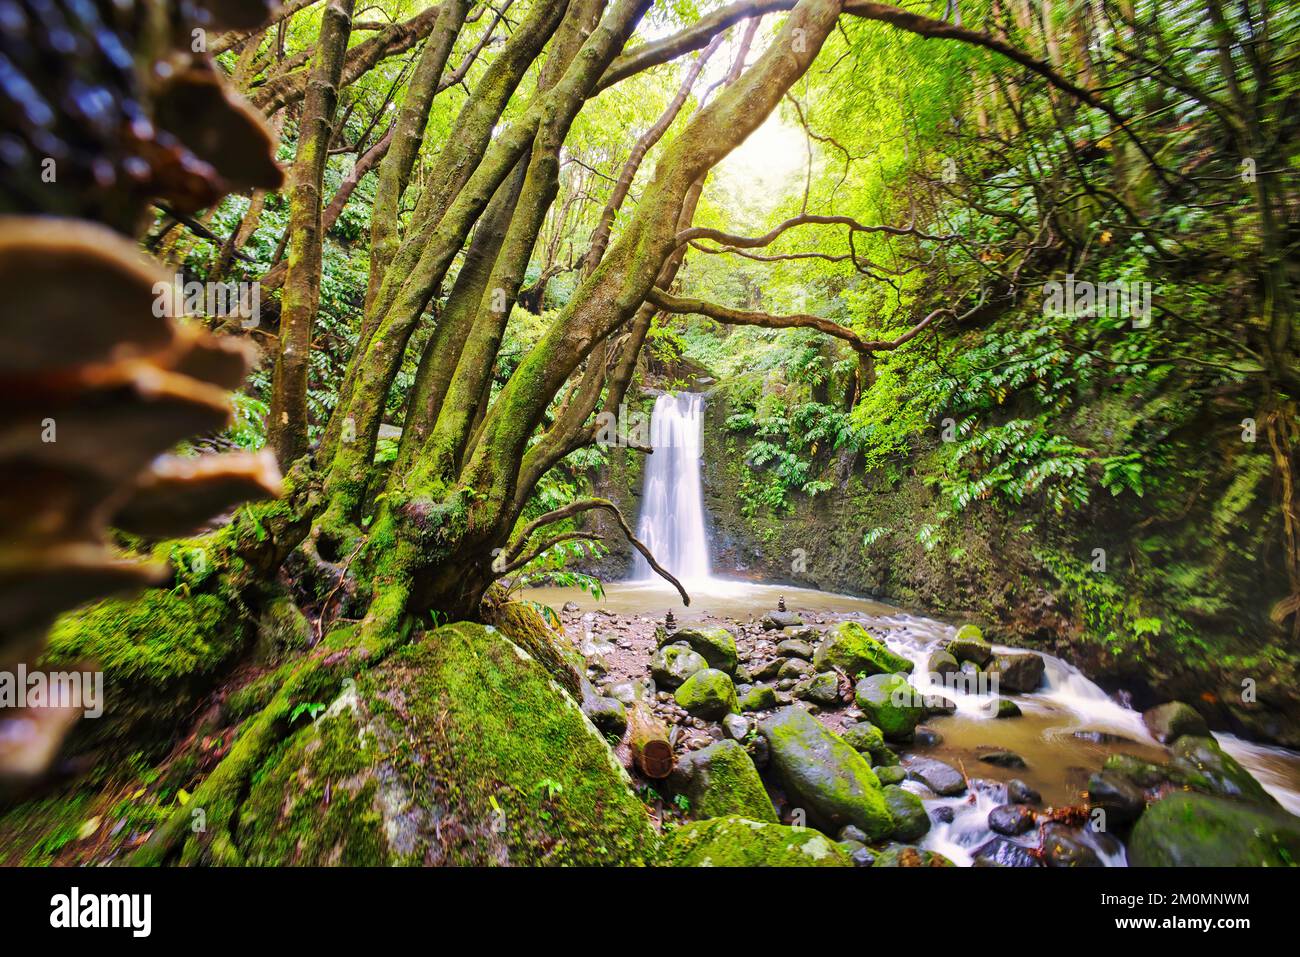 Salto do Prego waterfall lost in the rainforest, Sao Miguel Island, Azores, Portugal Stock Photo